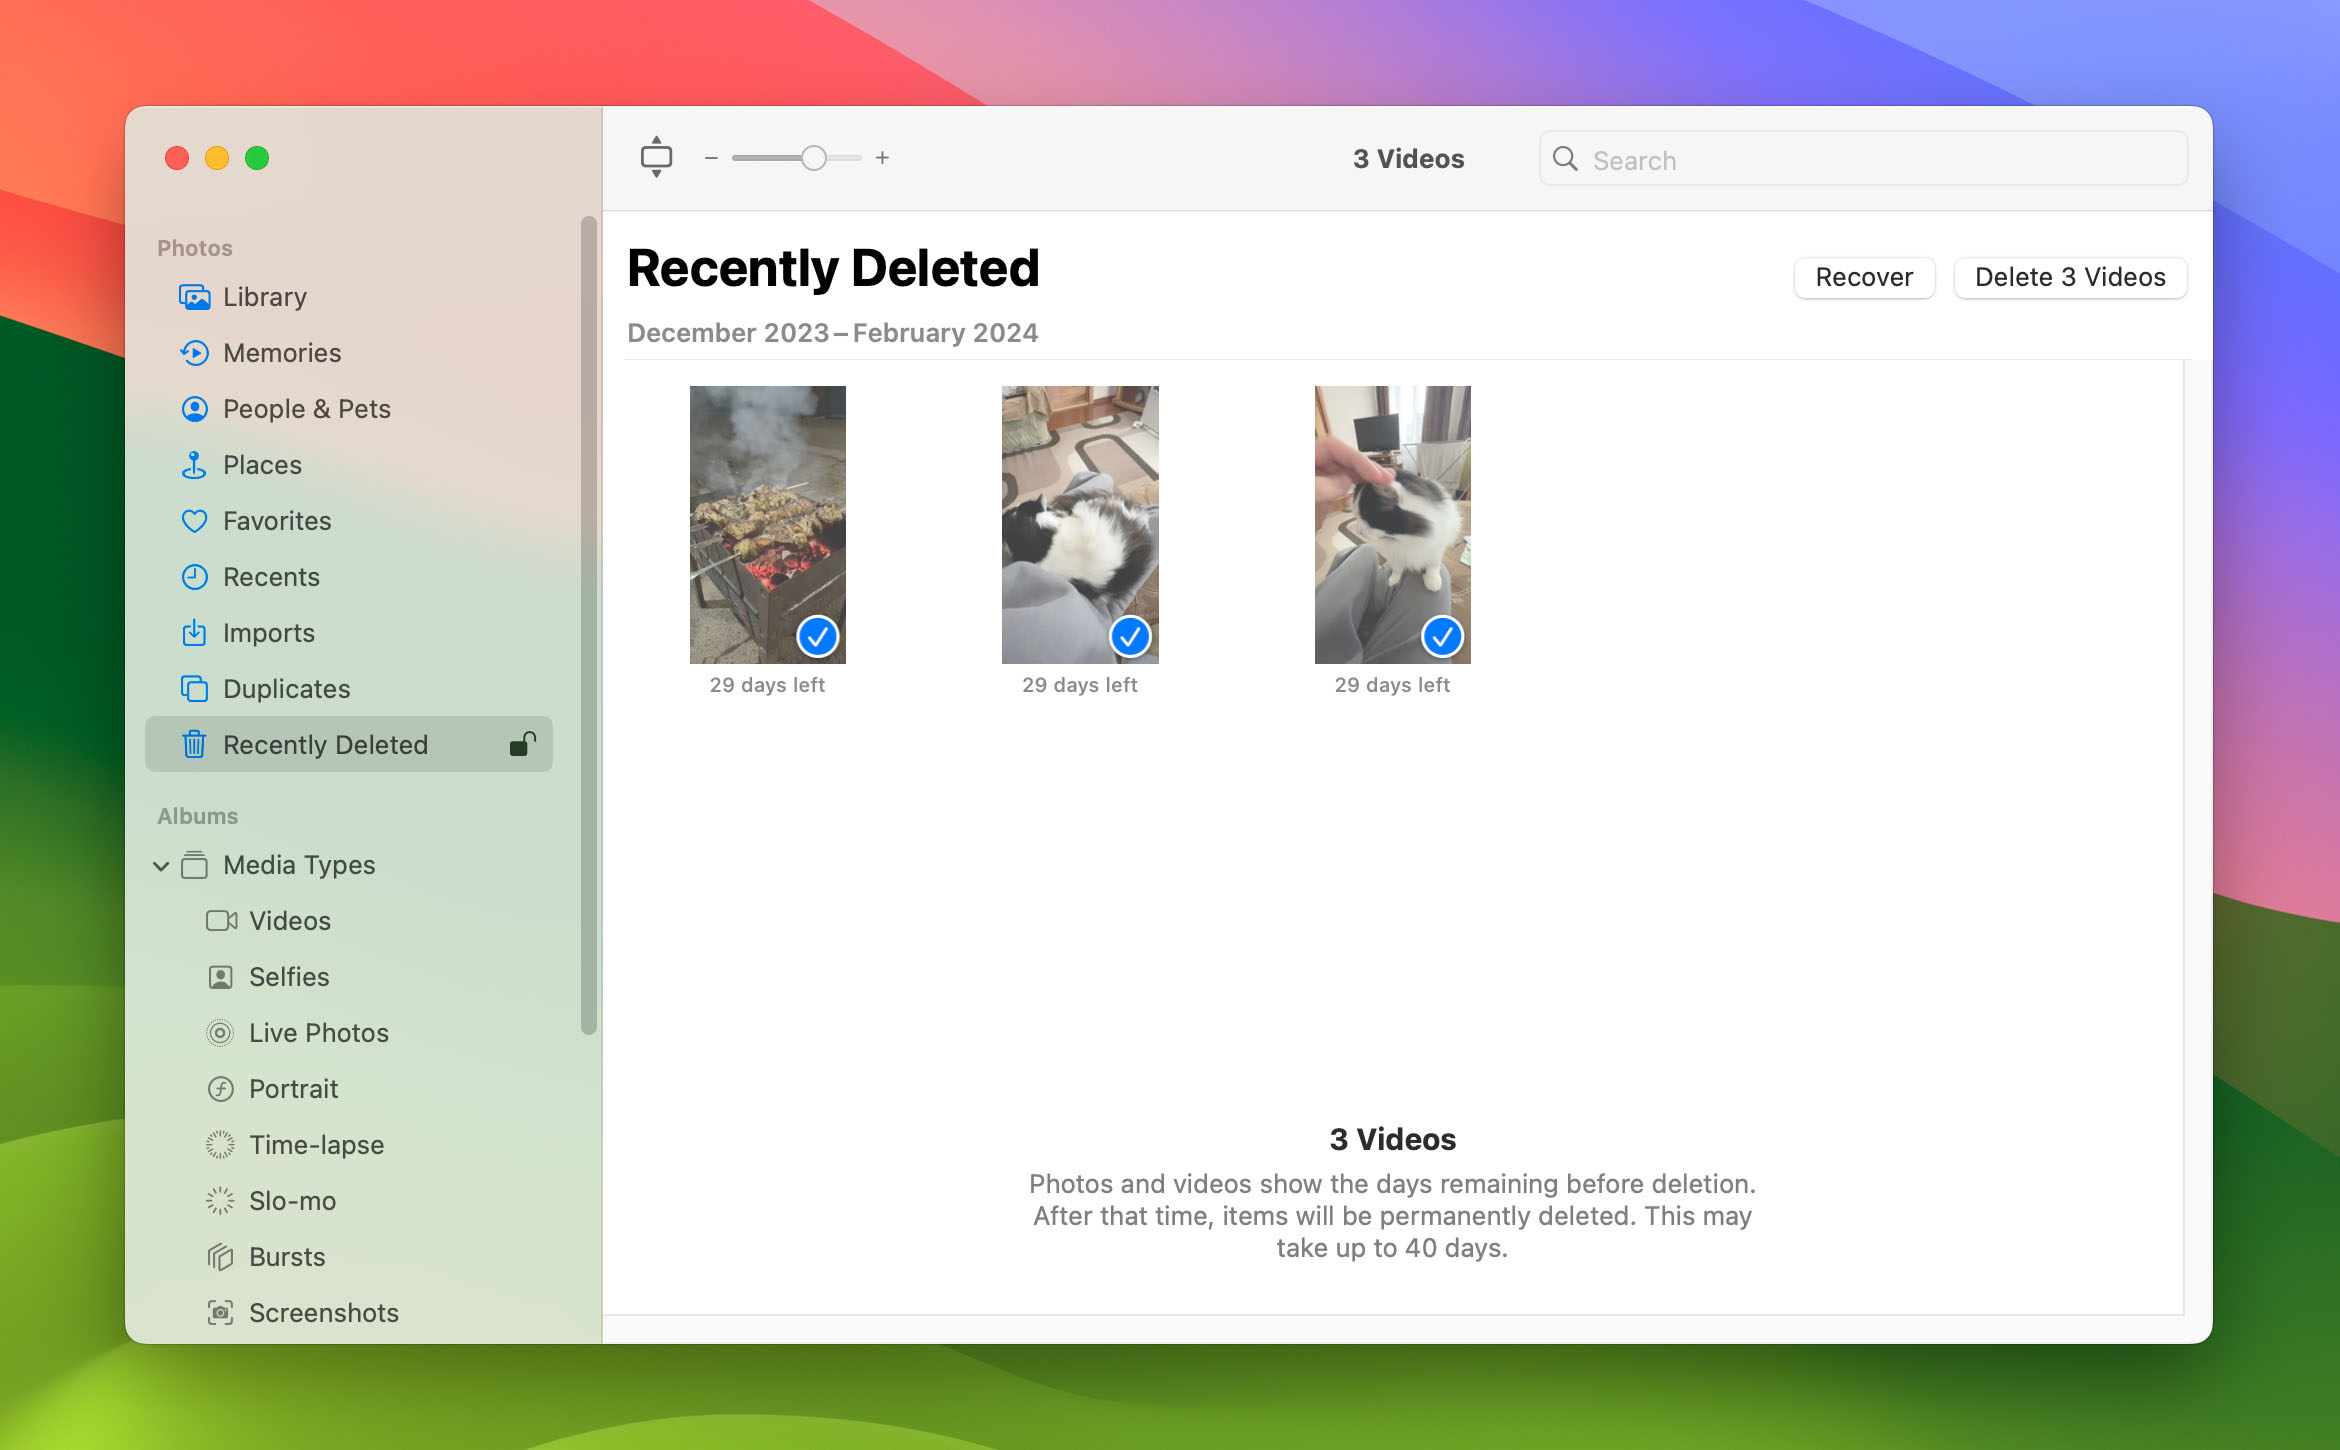 Recover videos from recently deleted album in Photos app